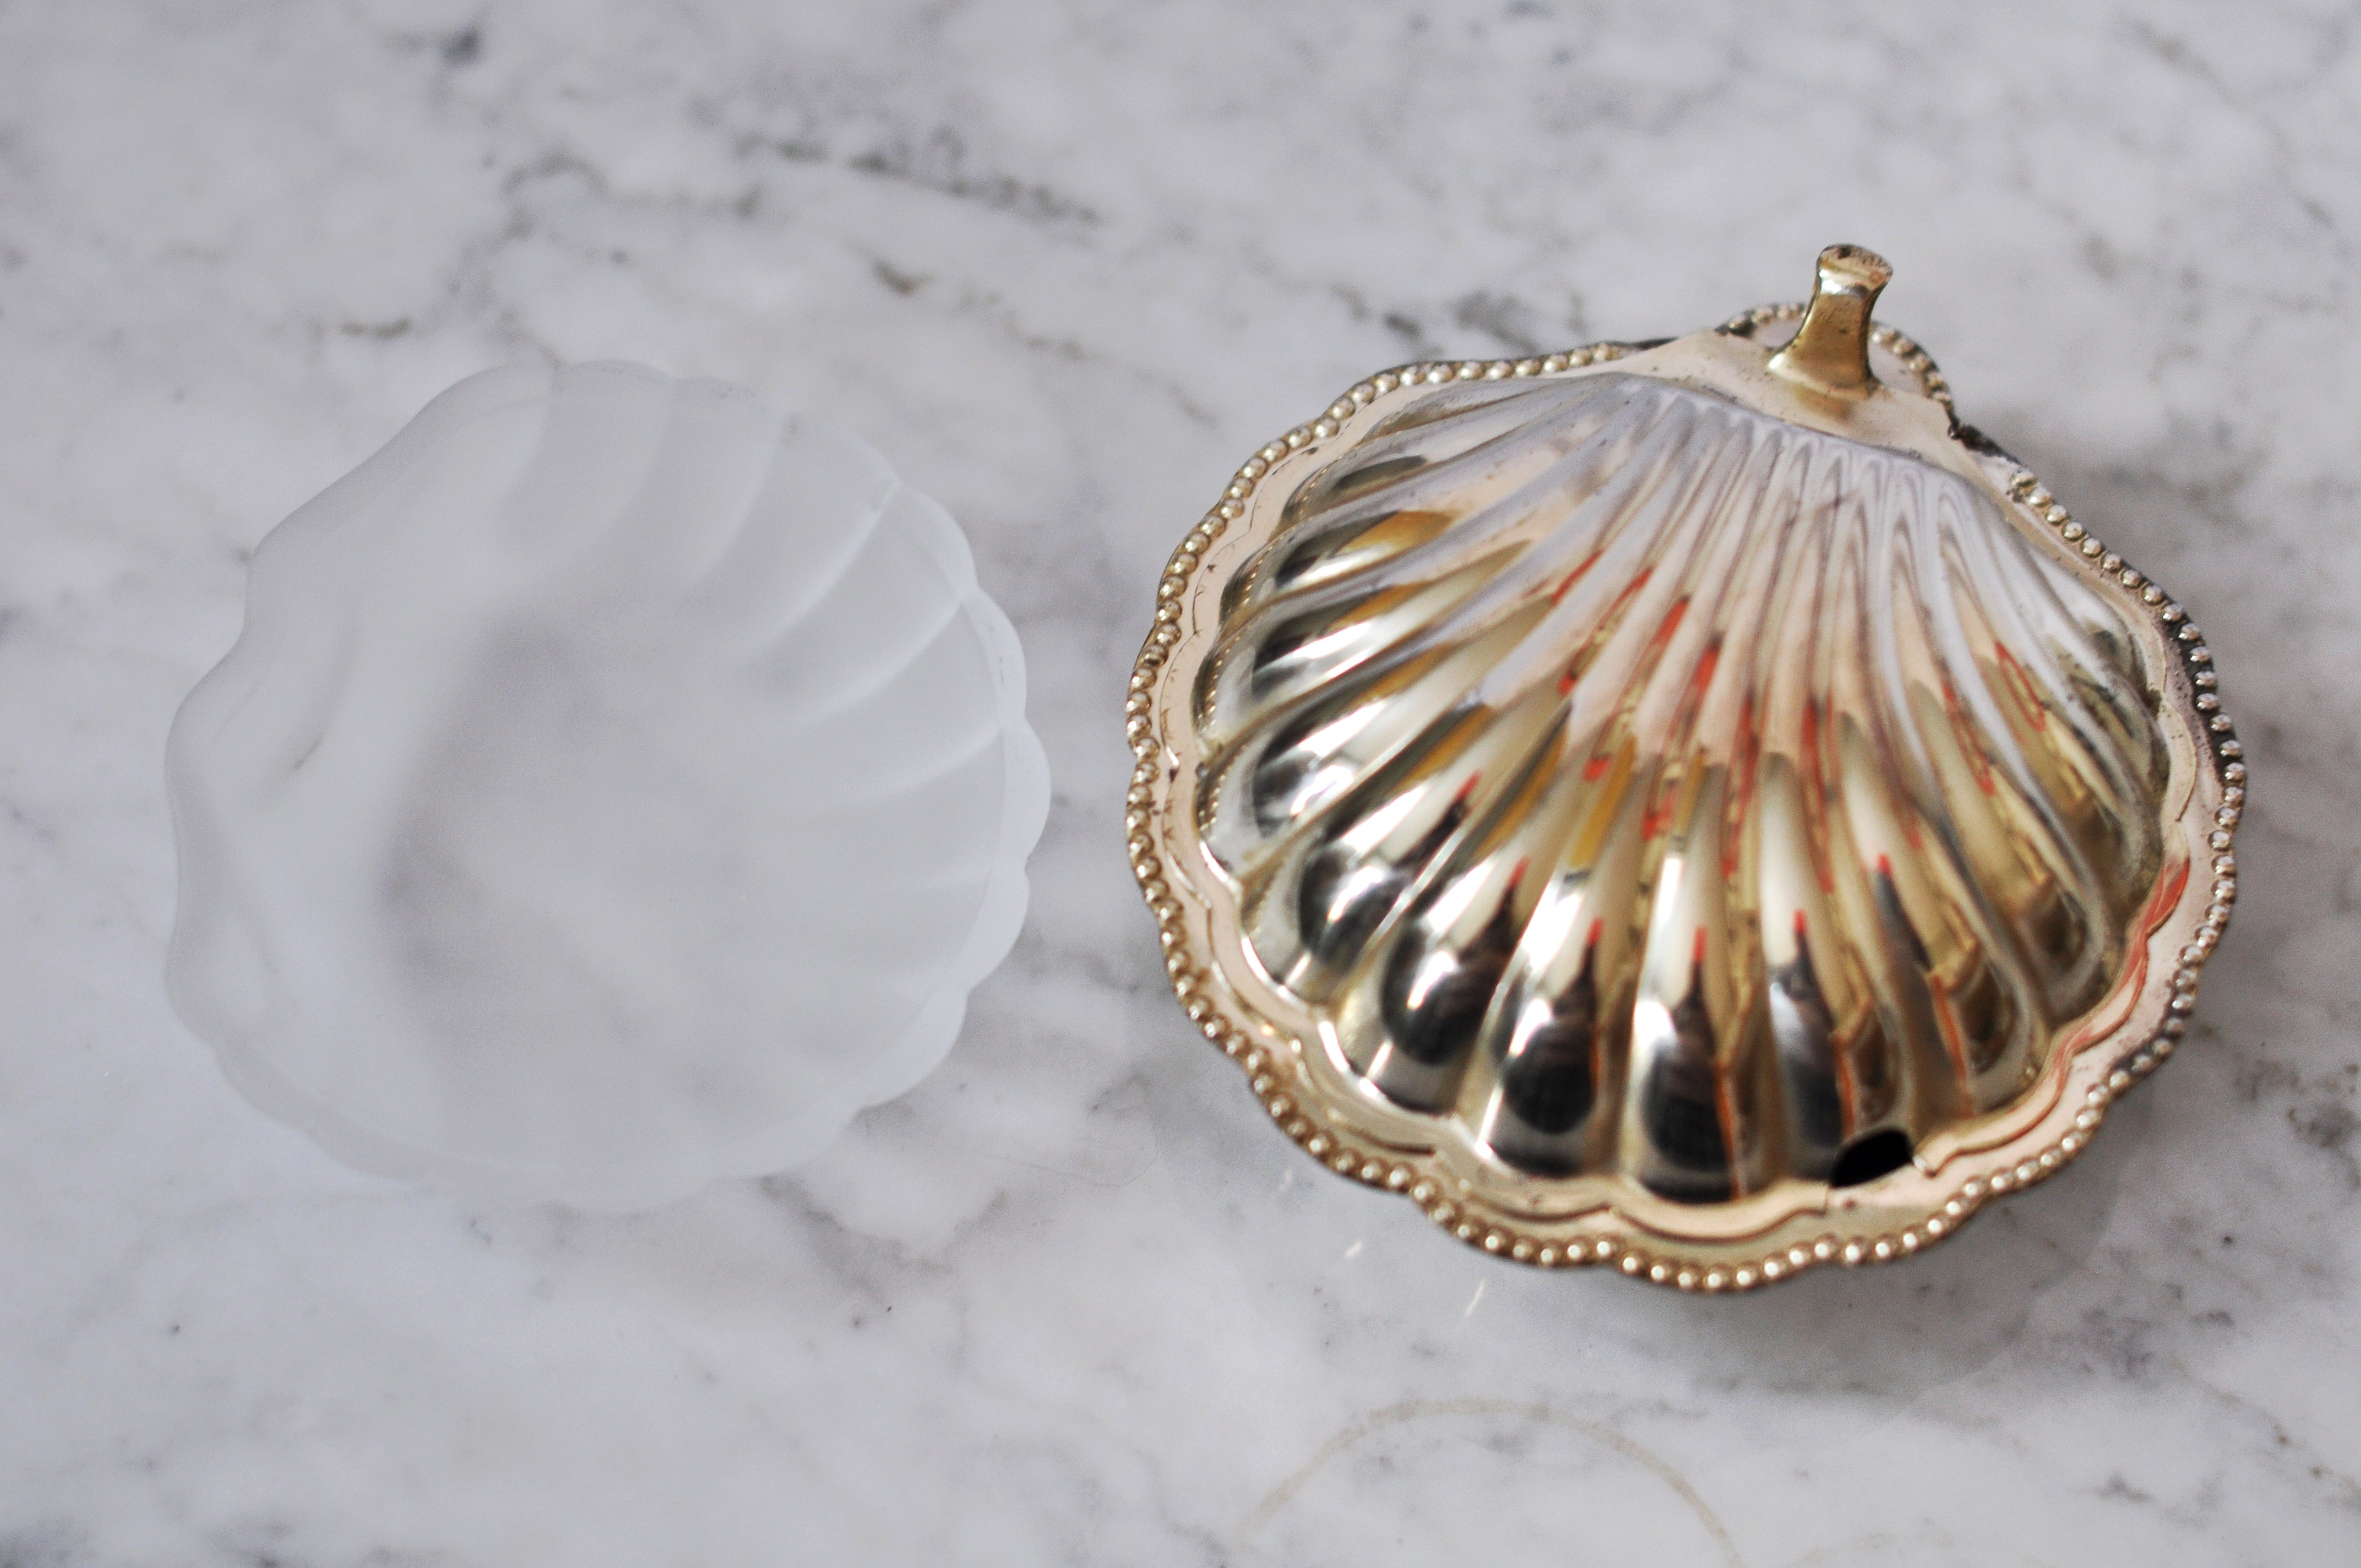 Vintage Chrome-toned Scallop Dish, Used for Caviar or Butter